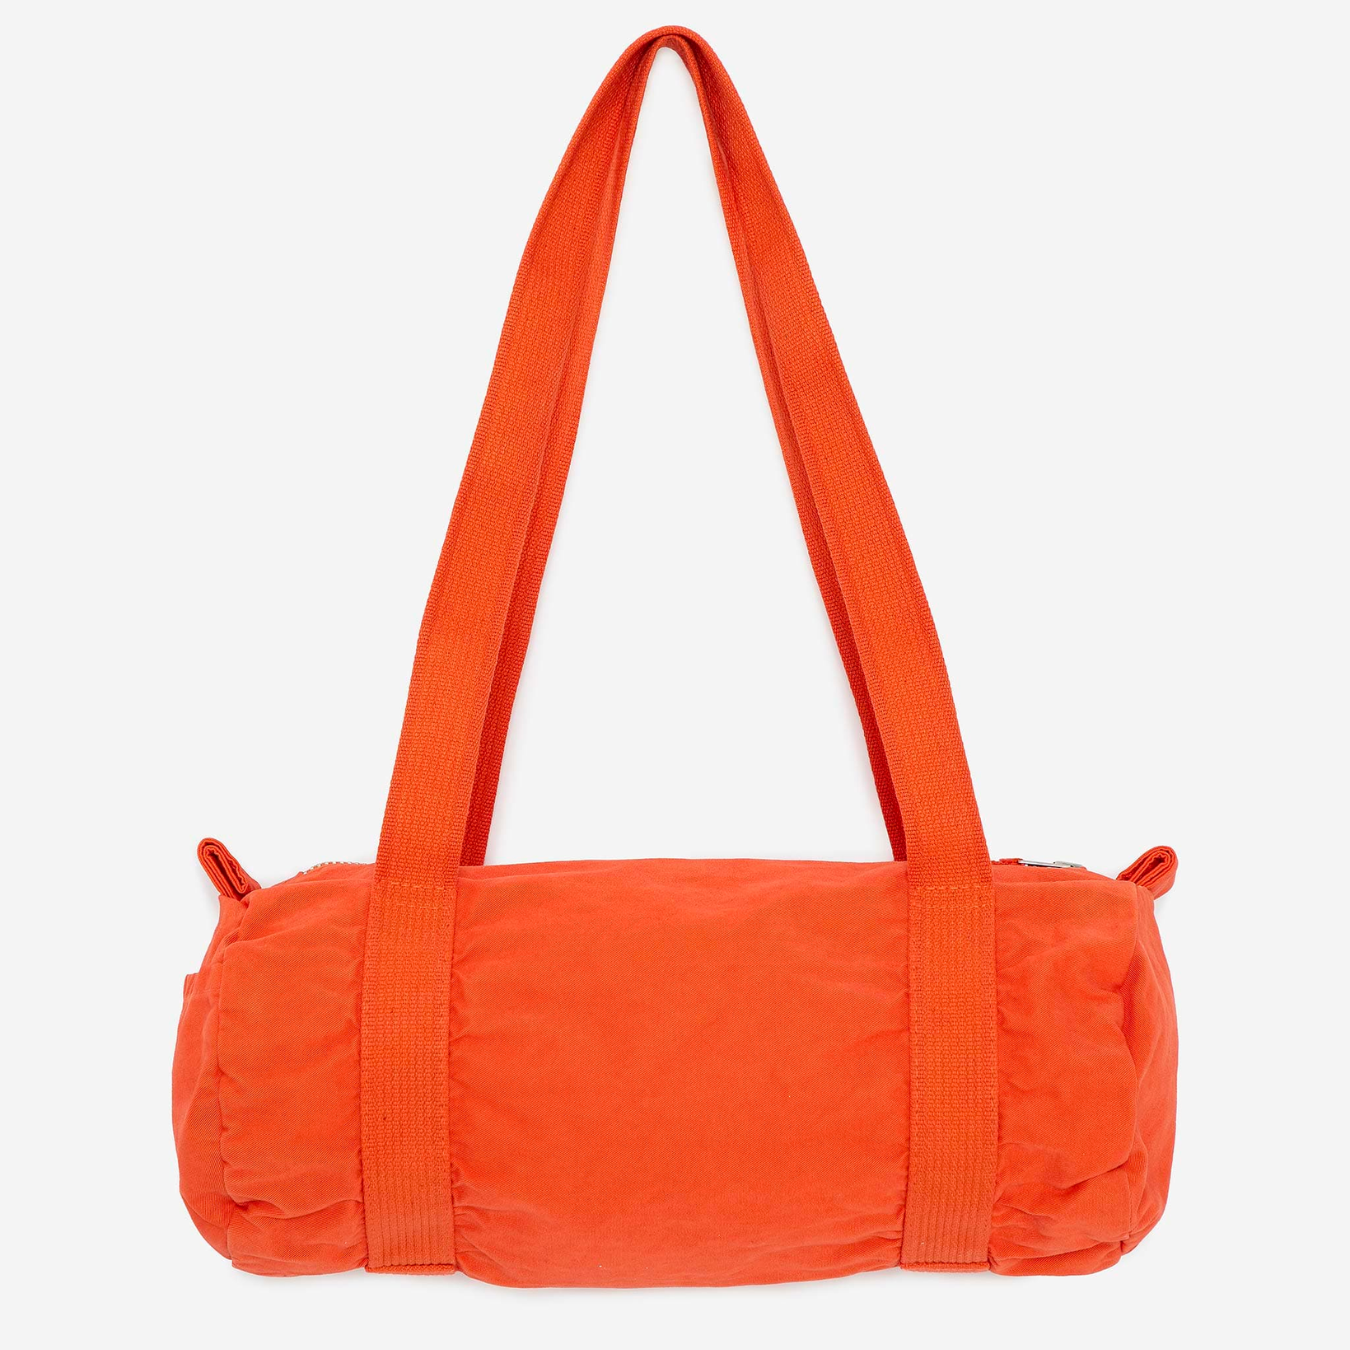 TRUE ARTIST SMALL GYM BAG Nº02: SPICY RED